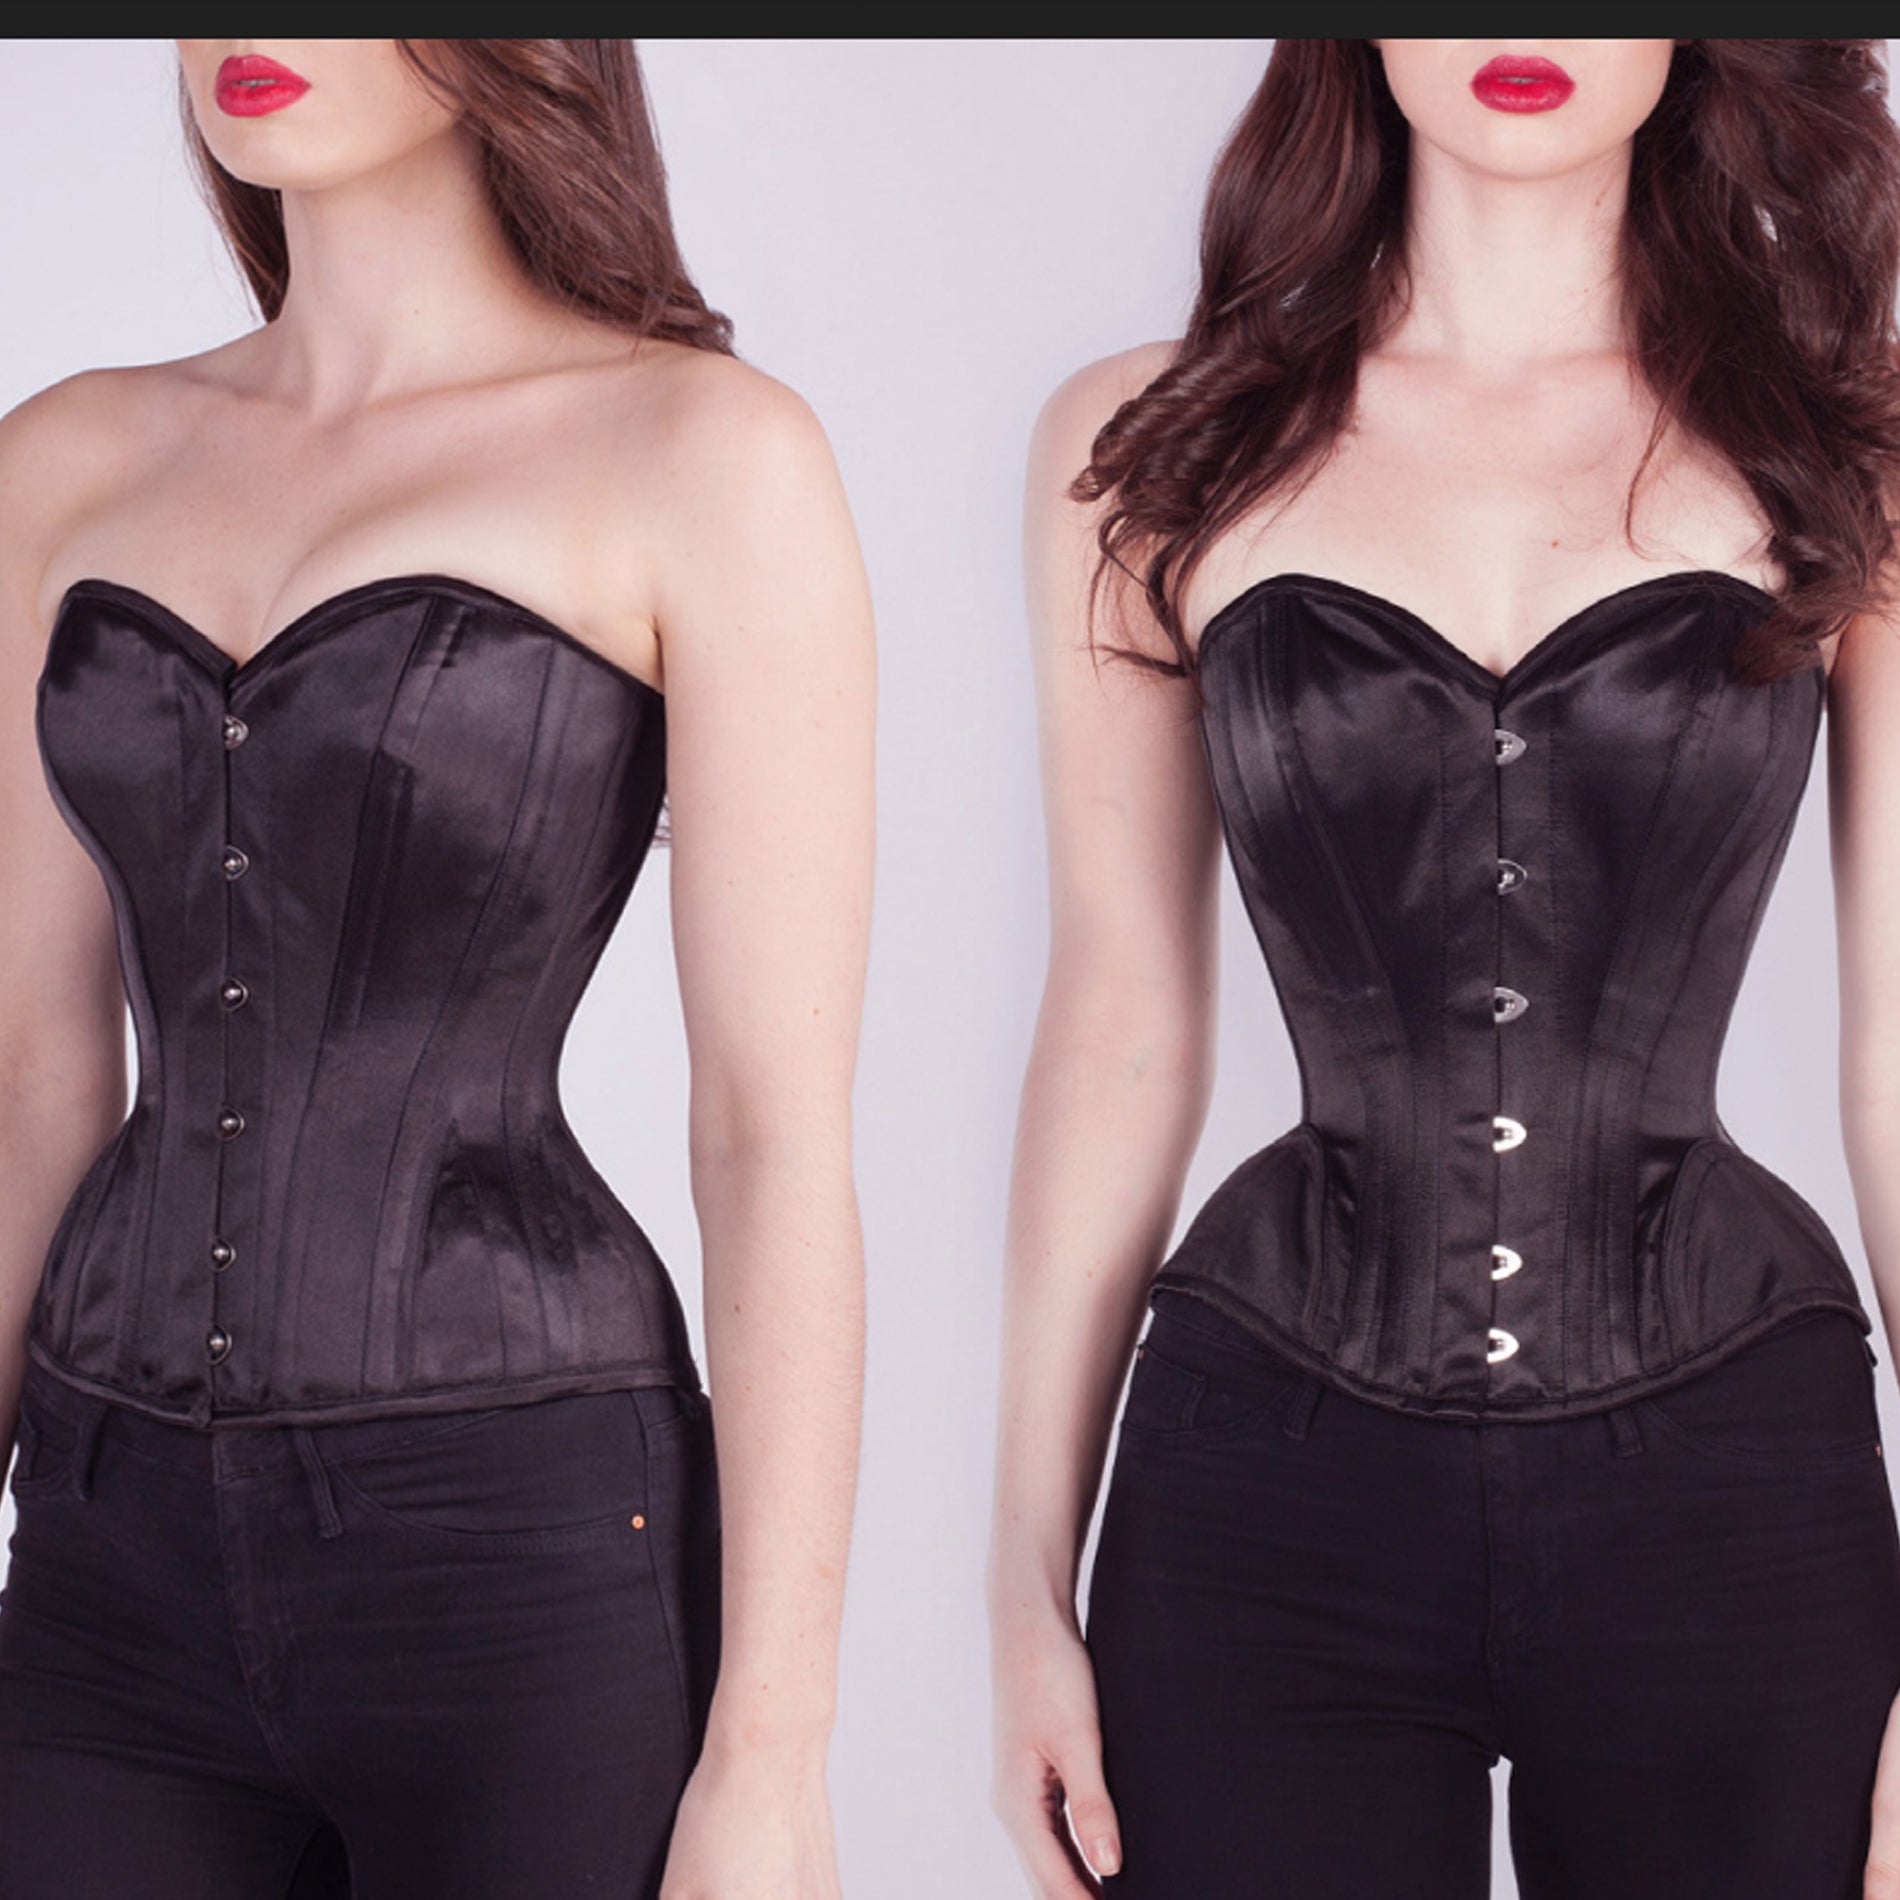 Is Wearing a Corset Bad for you?